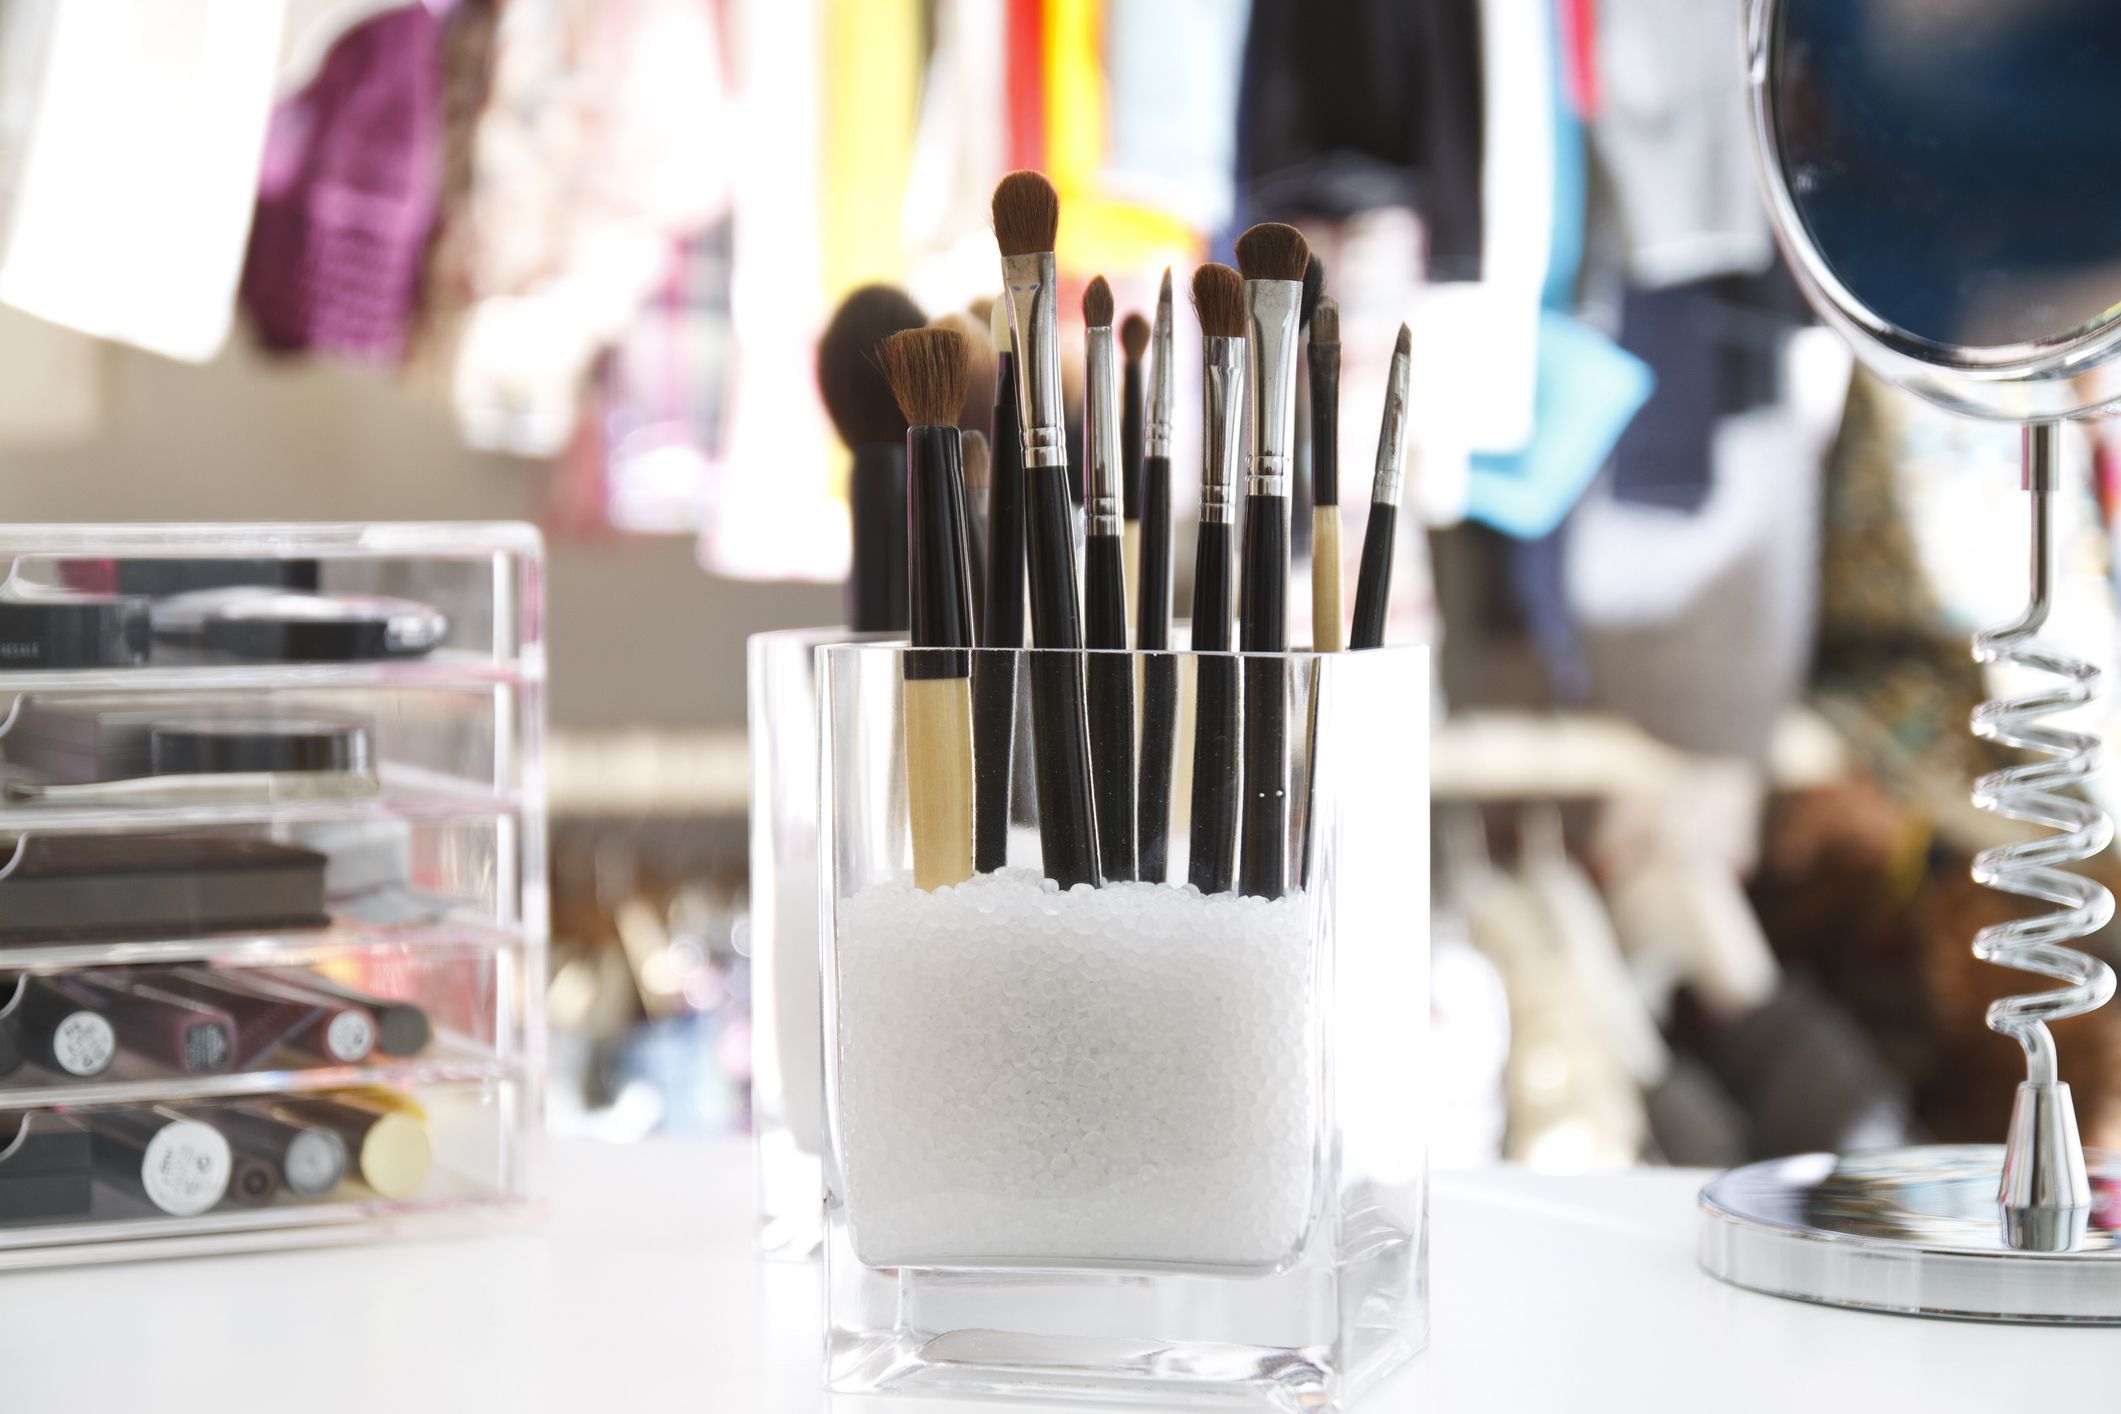 Makeup Organizer Ideas - 7 Brilliant Makeup Storage Ideas and Containers